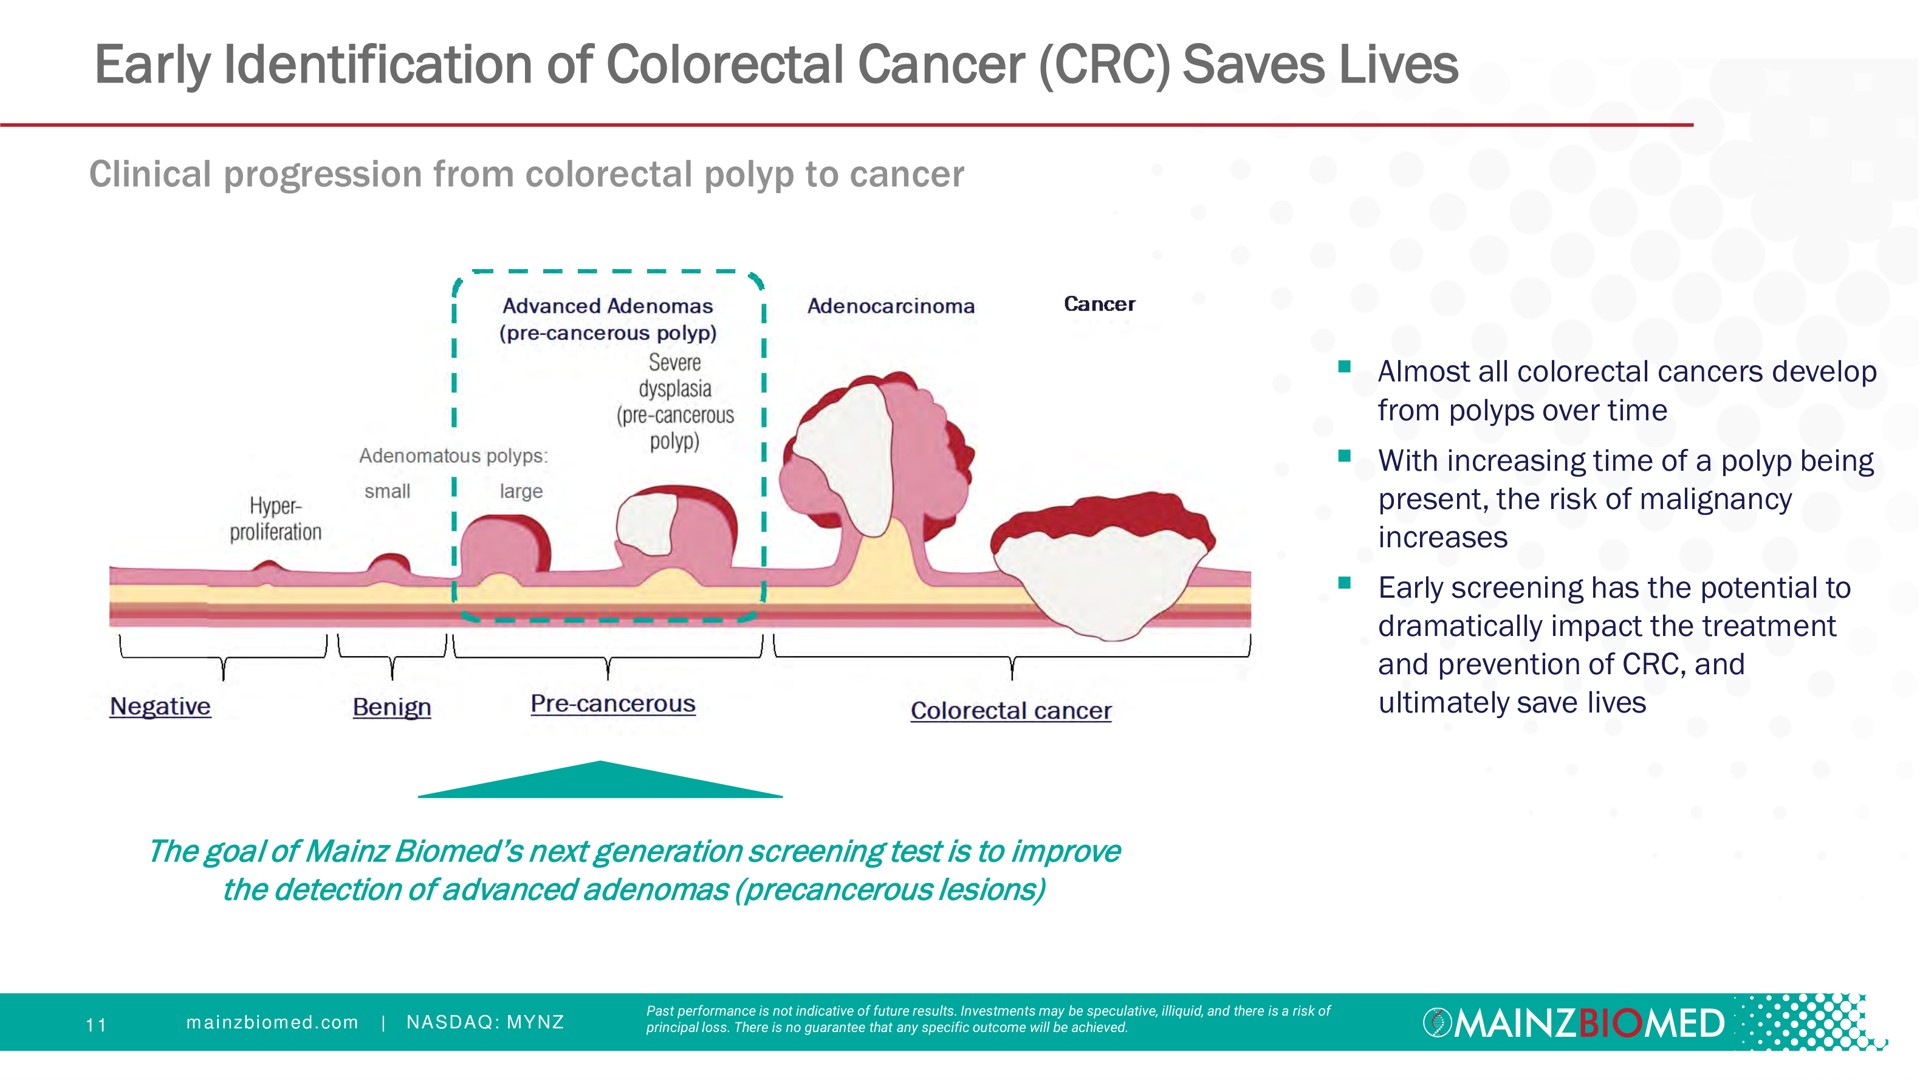 early identification of cancer saves lives a and prevention and | Mainz Biomed NV